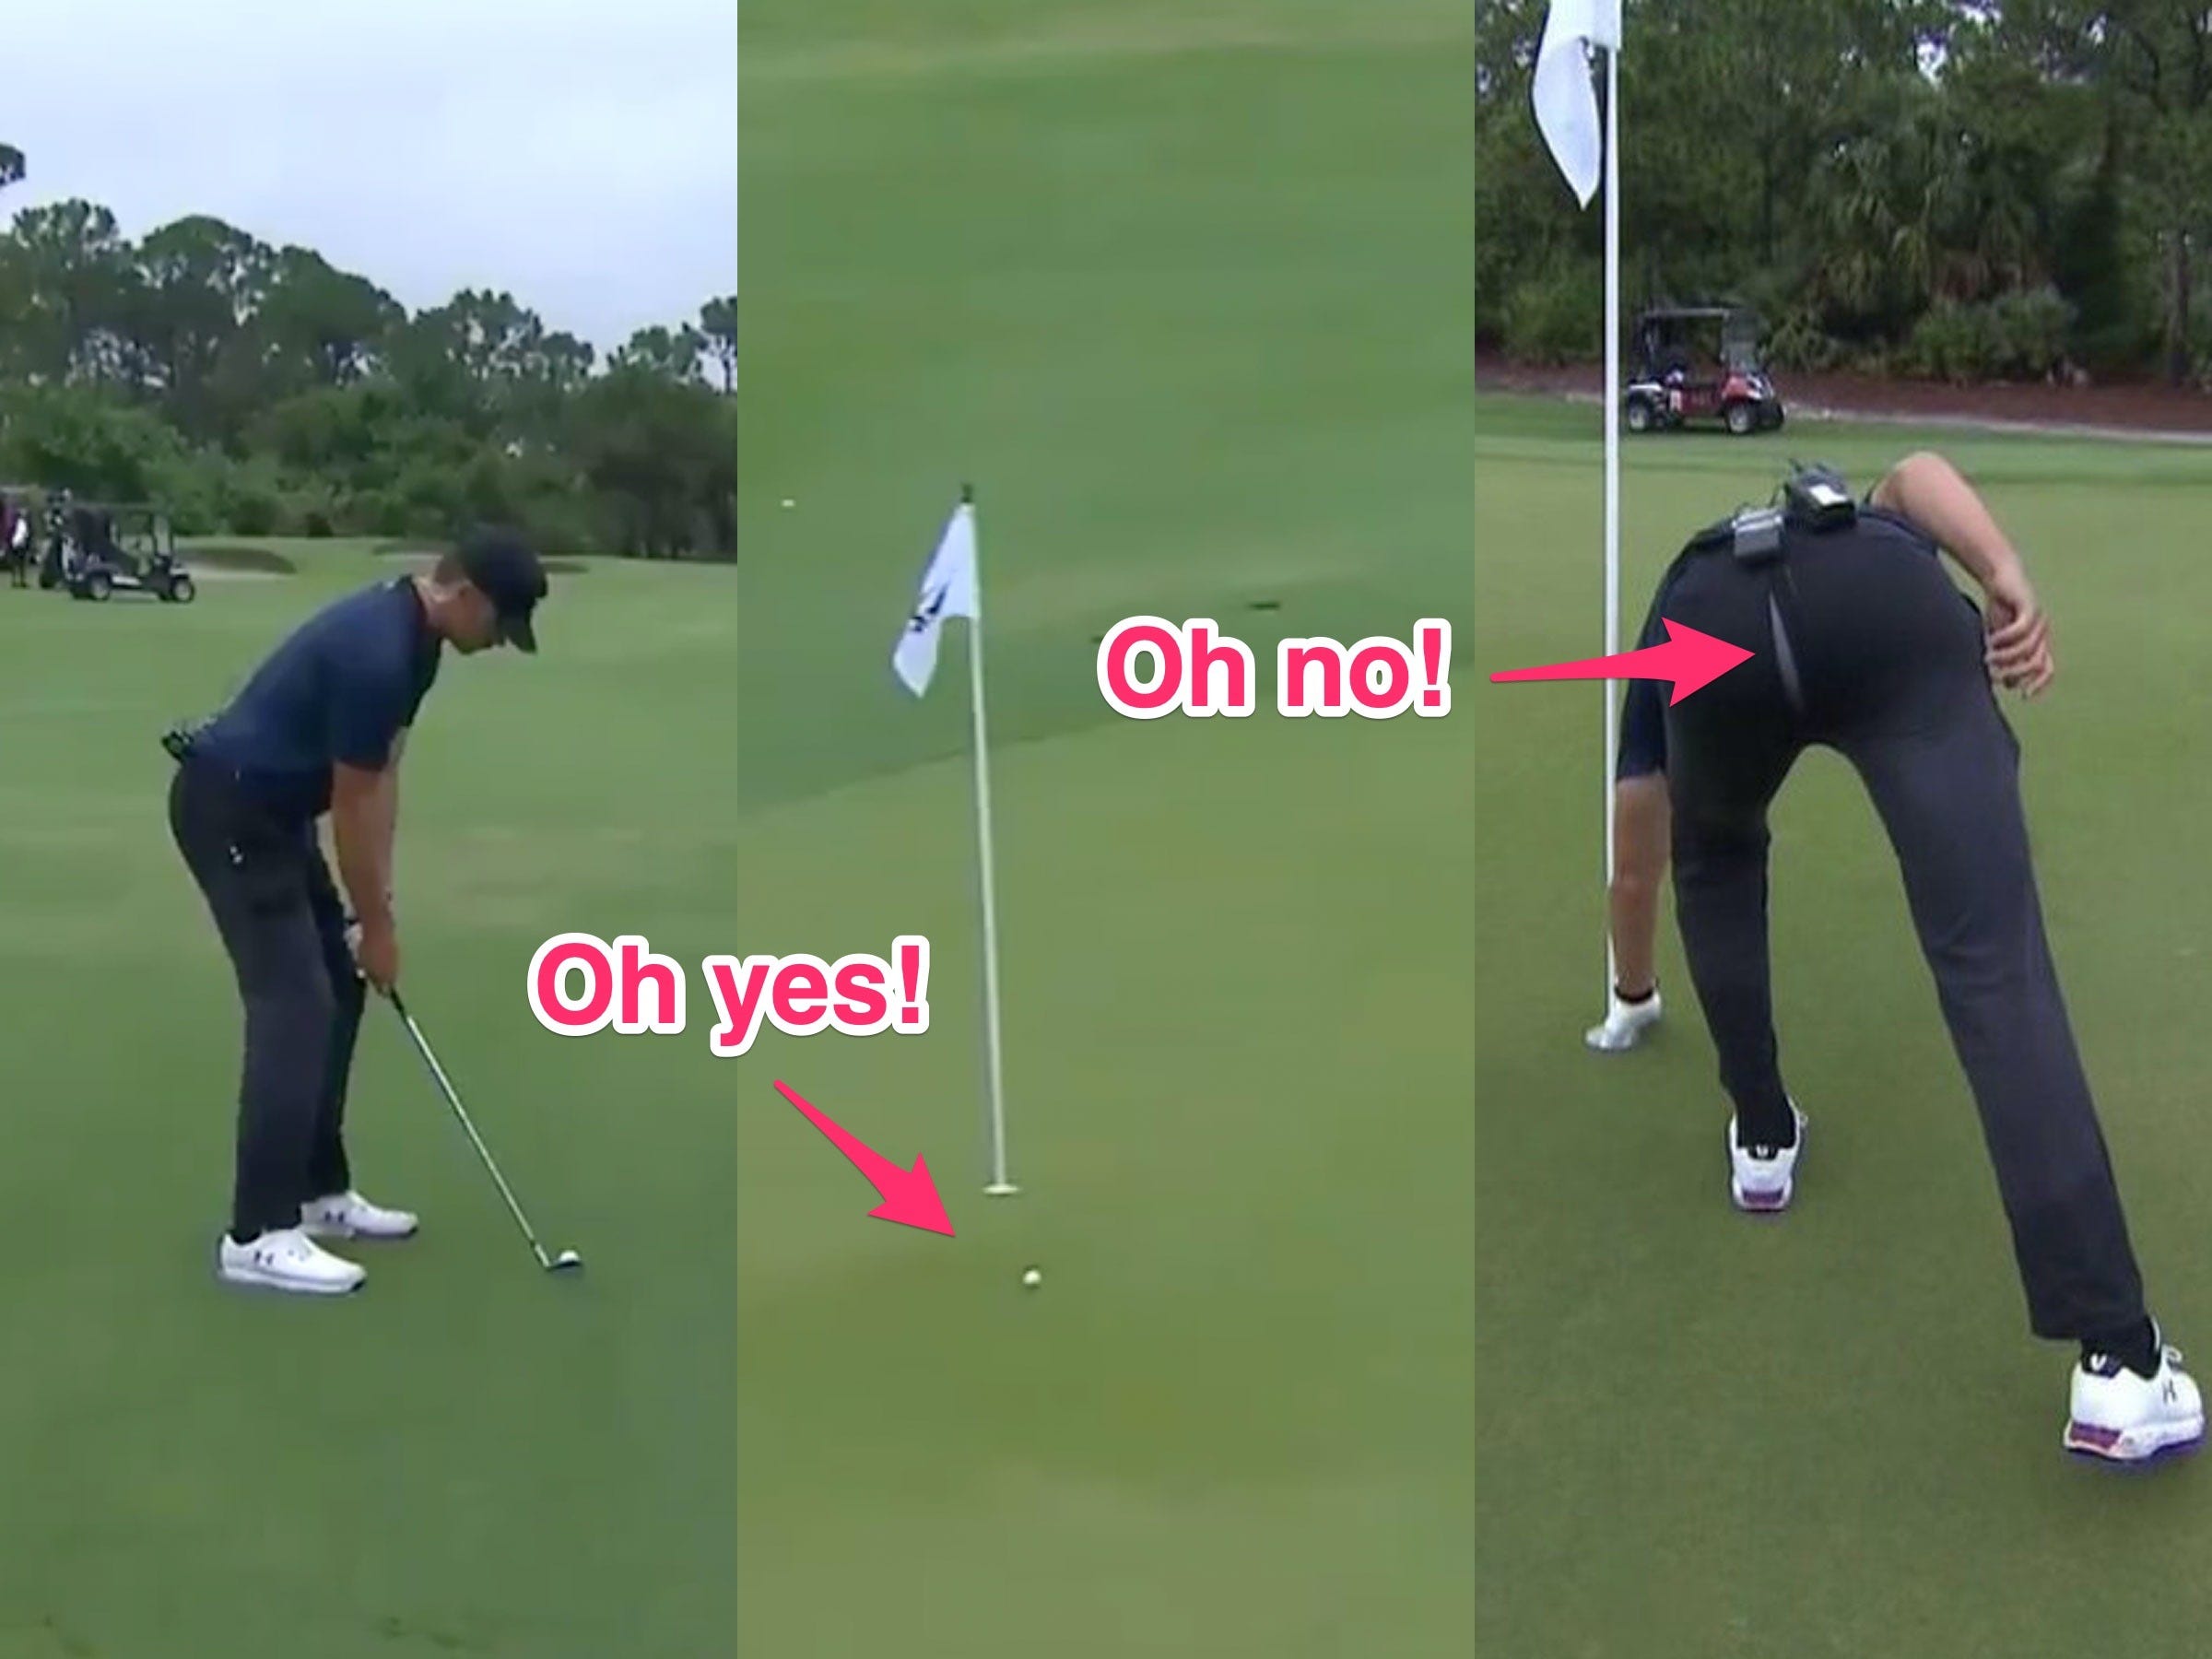 Tom Brady ripped a huge hole in the back of his pants on national television after hitting miraculous golf shot